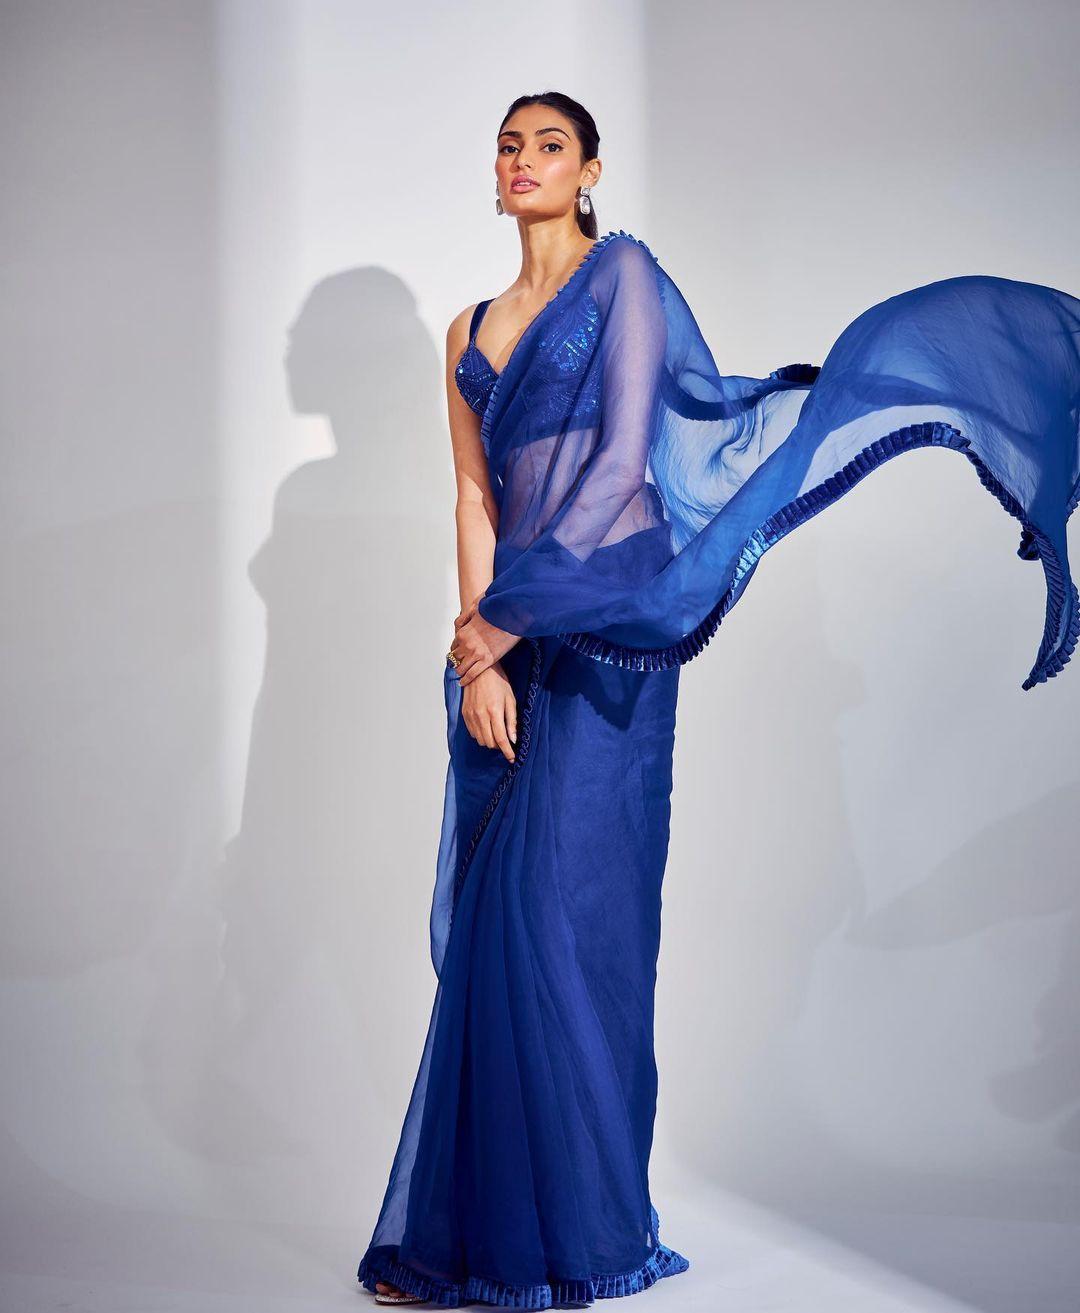 Athiya Shetty looked ethereal in a blue sheer saree that accentuated her beauty.